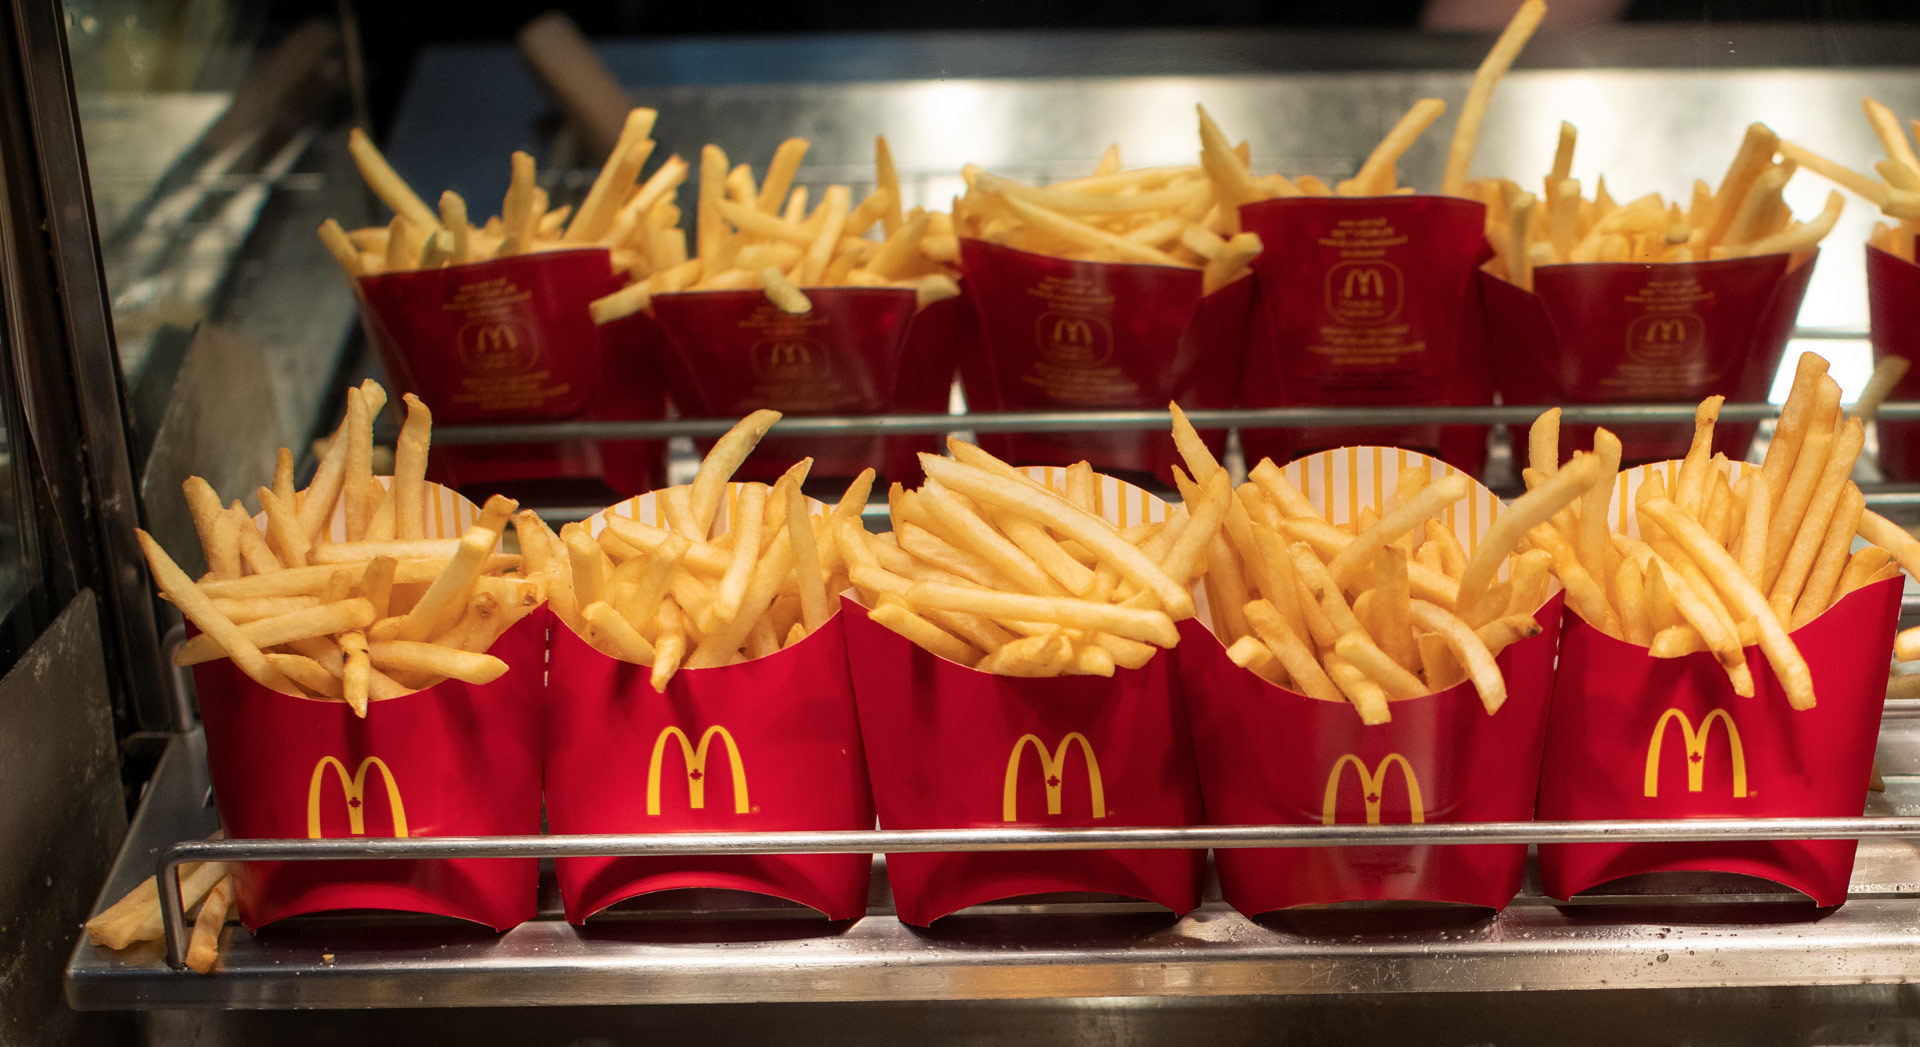 Know Our Food - What measures are put in place to ensure the highest quality of McDonald's fries?